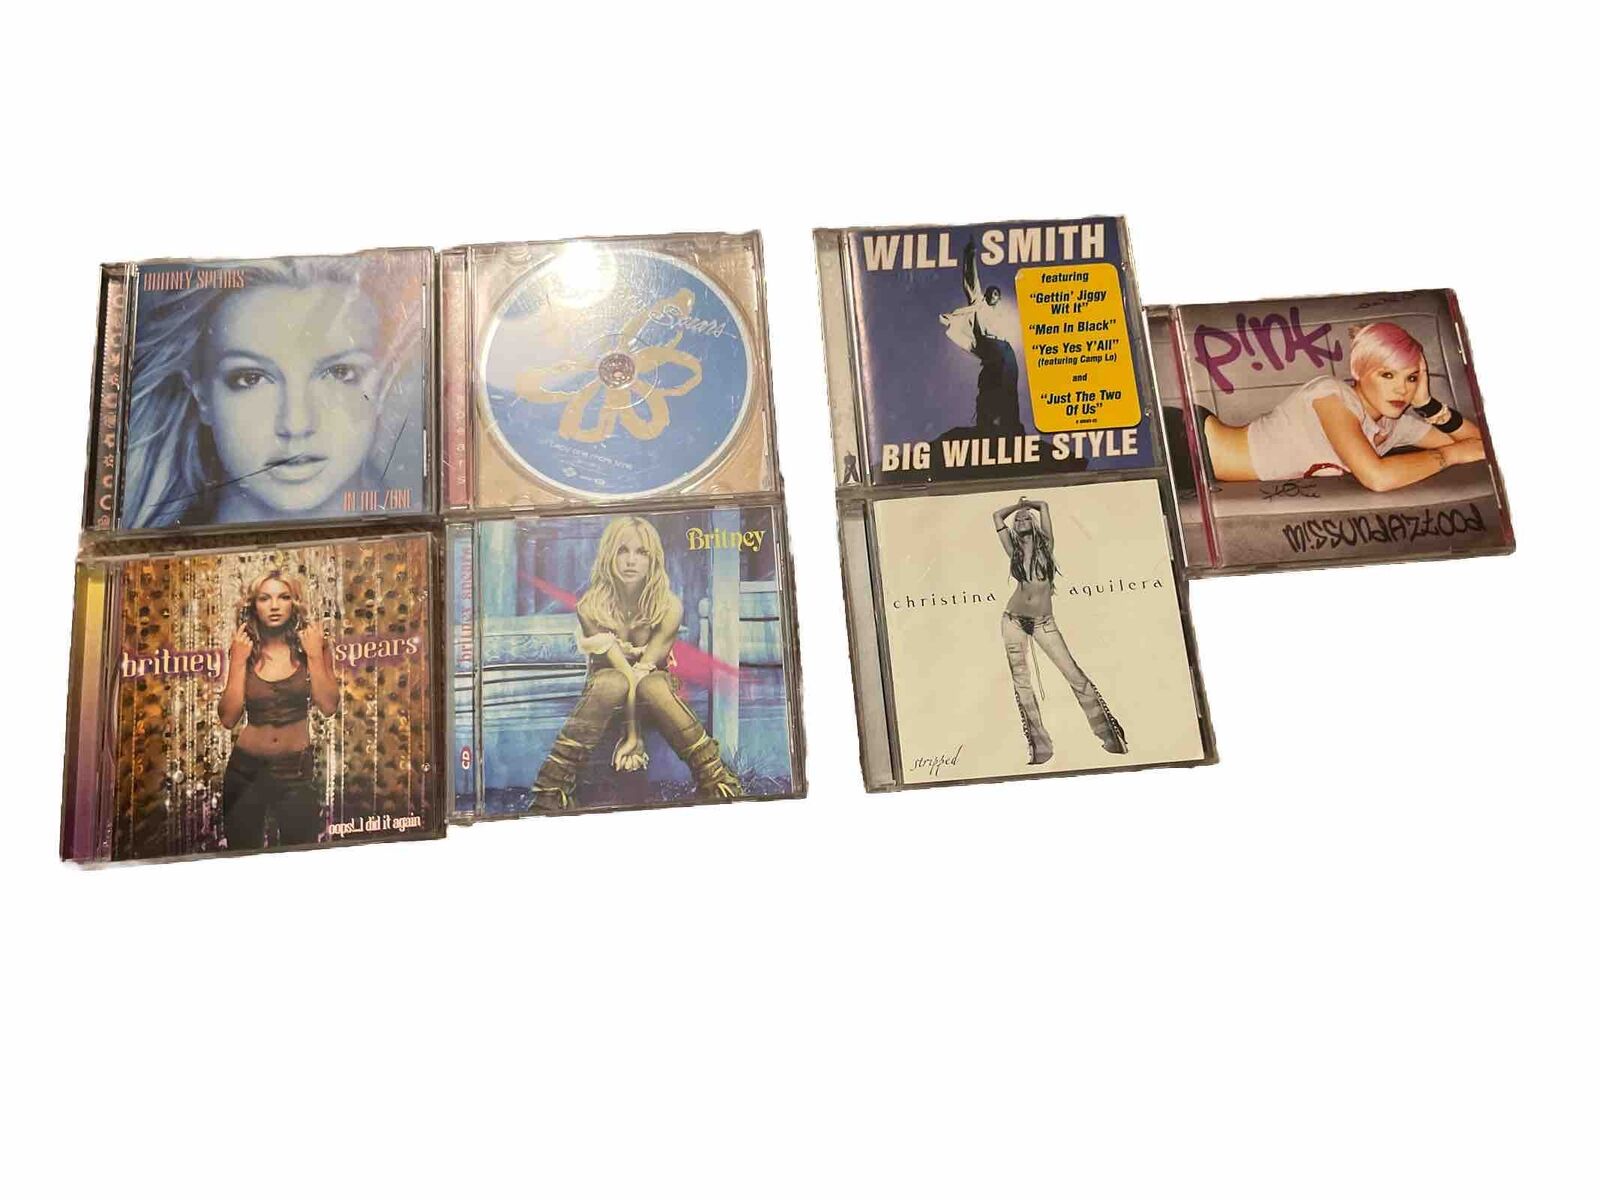 7 CD Lot - 4 Brittany Spears, 1 Christina Aguilera, 1 Will Smith | 1997-2003 CDs